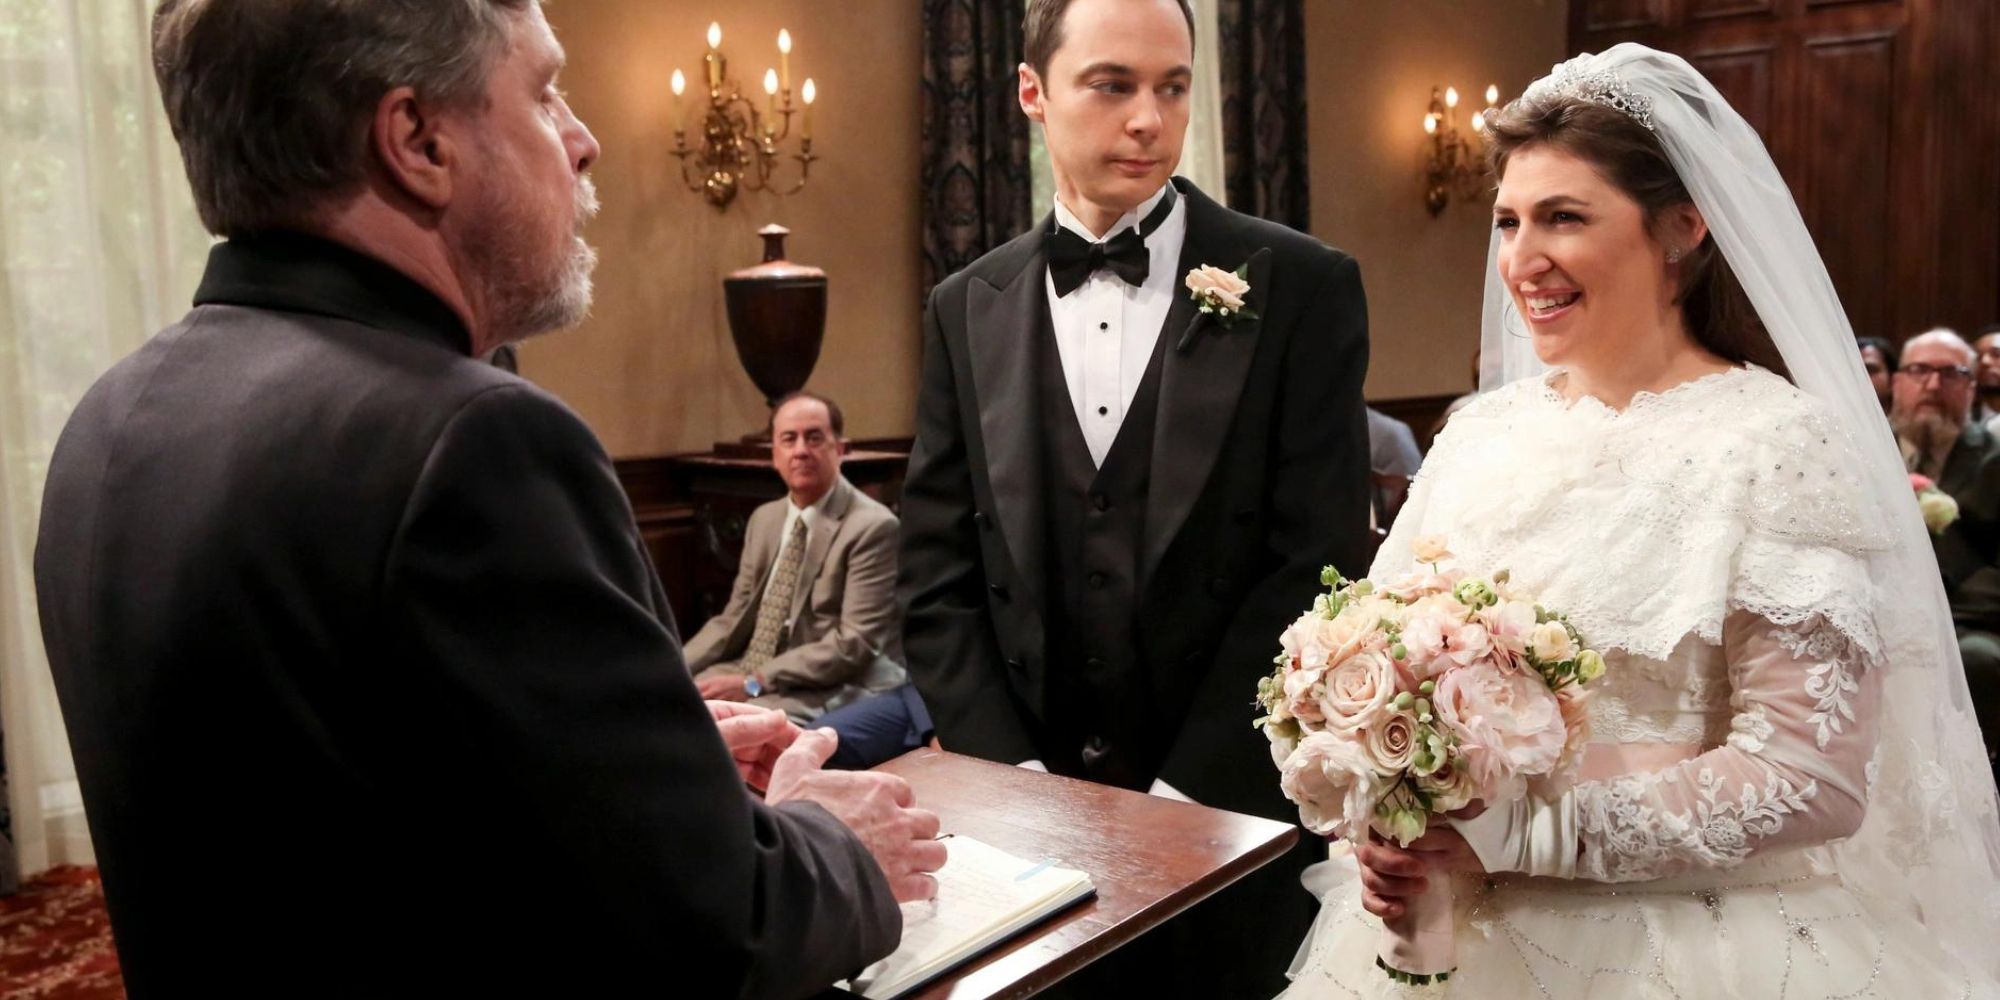 Sheldon and Amy from 'The Big Bang Theory' get married